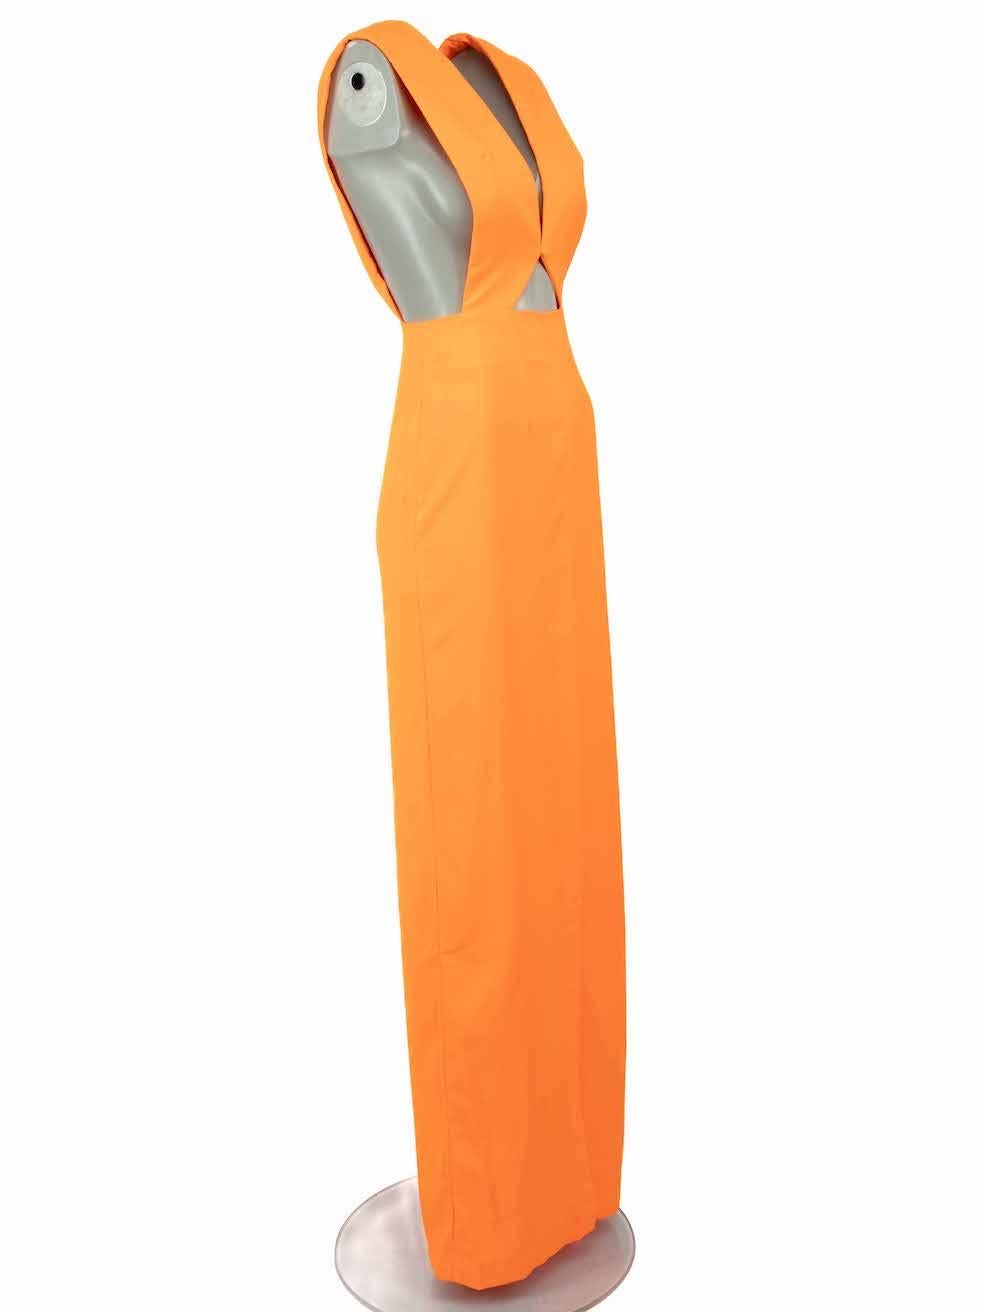 CONDITION is Never worn, with tags. No visible wear to dress is evident on this new Solace London designer resale item.
 
Details
Orange
Polyester
Dress
Cut-out
Maxi
Sleeveless
Plunge neck
Front leg slit
Back zip, hook and button fastening
 
Made in